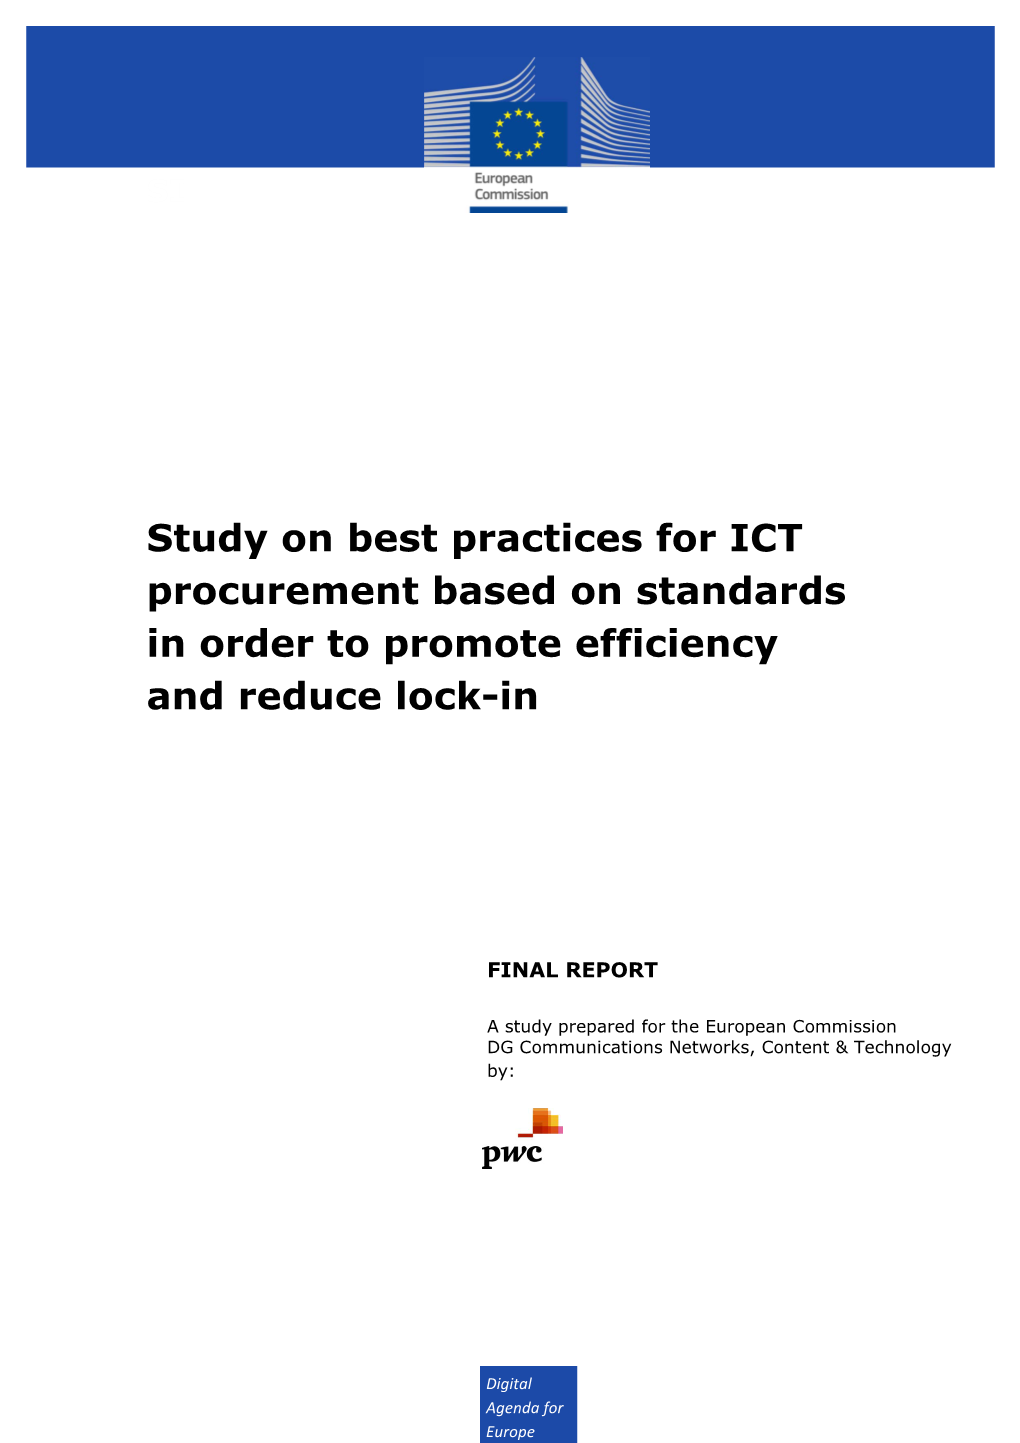 Study on Best Practices for ICT Procurement Based on Standards in Order to Promote Efficiency and Reduce Lock-In